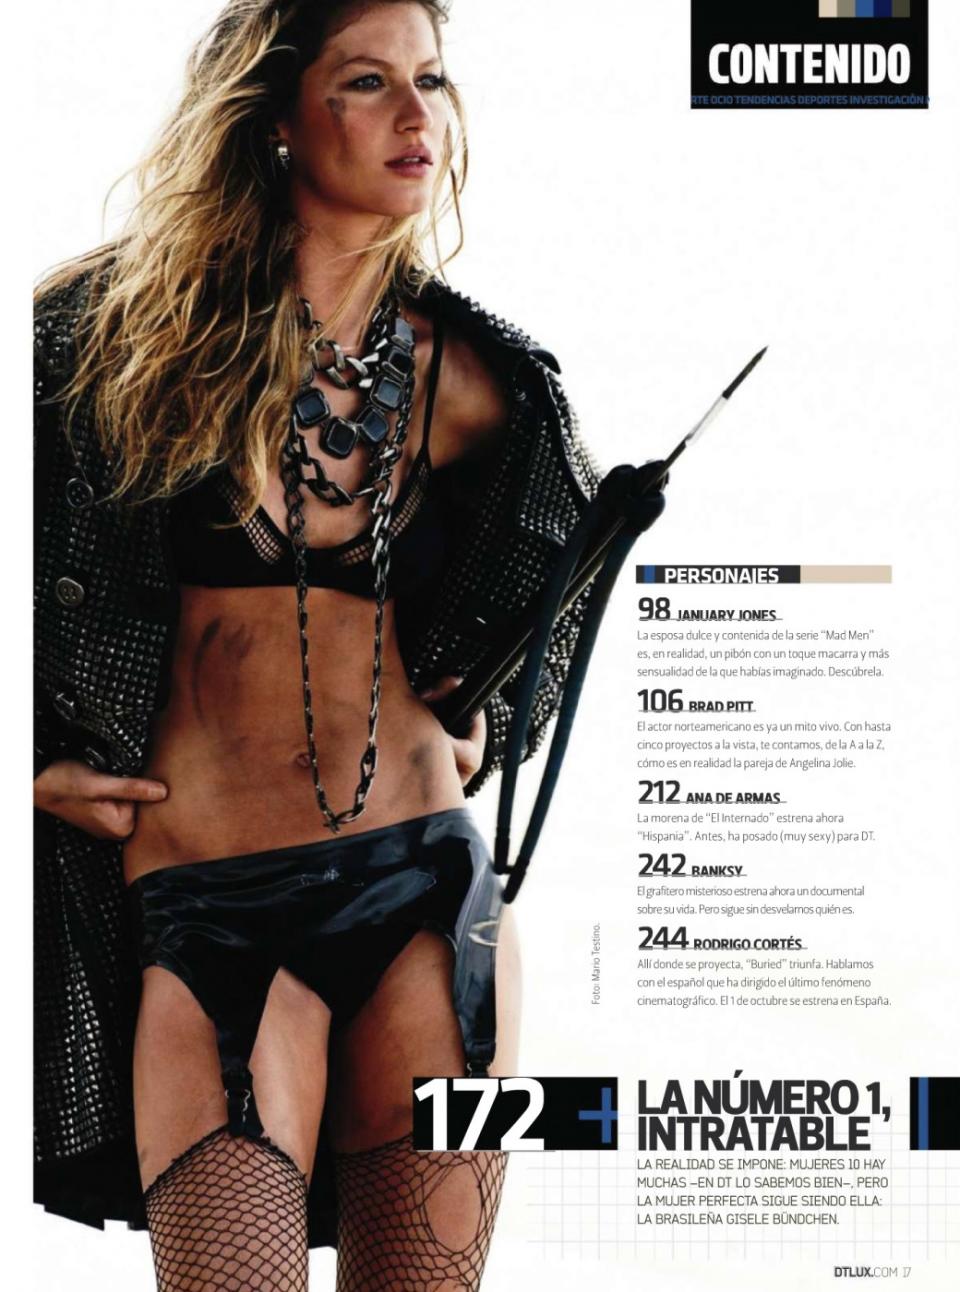 One of the most famous lingerie models of today would obviously still have a job in the desert desolate future. Even covered in dirt and carrying weaponry, Gisele Bündchen, in this shoot for “DT” by Mario Testino, she could go to combat and sell underwear in the process.